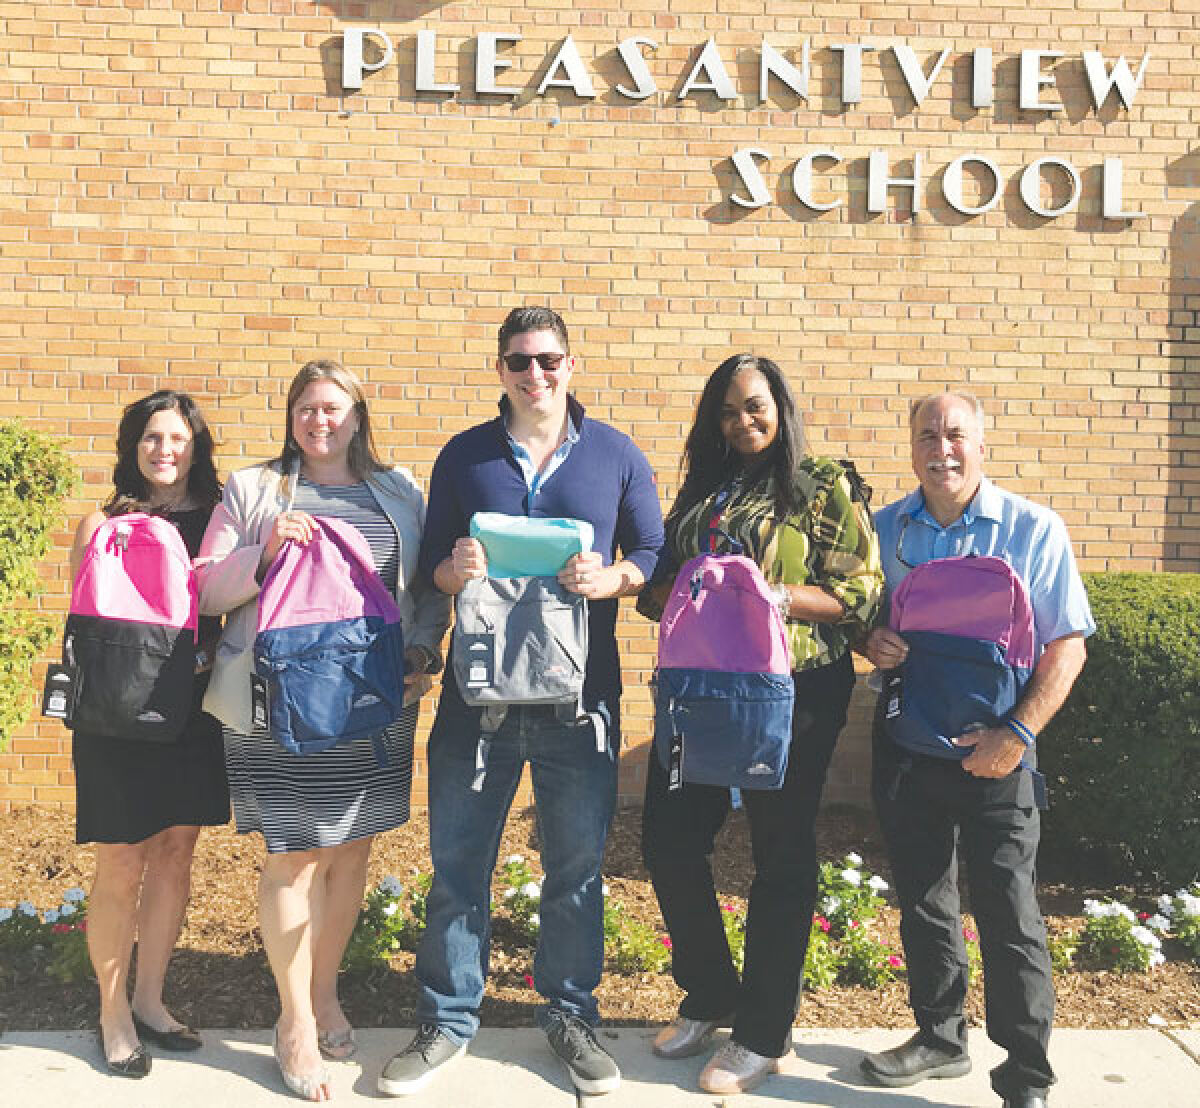  On Aug. 31, Pleasantview Elementary School in Eastpointe received 50 backpacks through AT&T’s Tools for Learning campaign. Pictured from left are Lori Doughty, AT&T Michigan external/regulatory affairs director; Eastpointe Community Schools Superintendent Christina Gibson; state Sen. Michael McDonald; Pleasantview Principal Falicia Moreland-Trice; and McDonald’s district director, Phil Rode. 